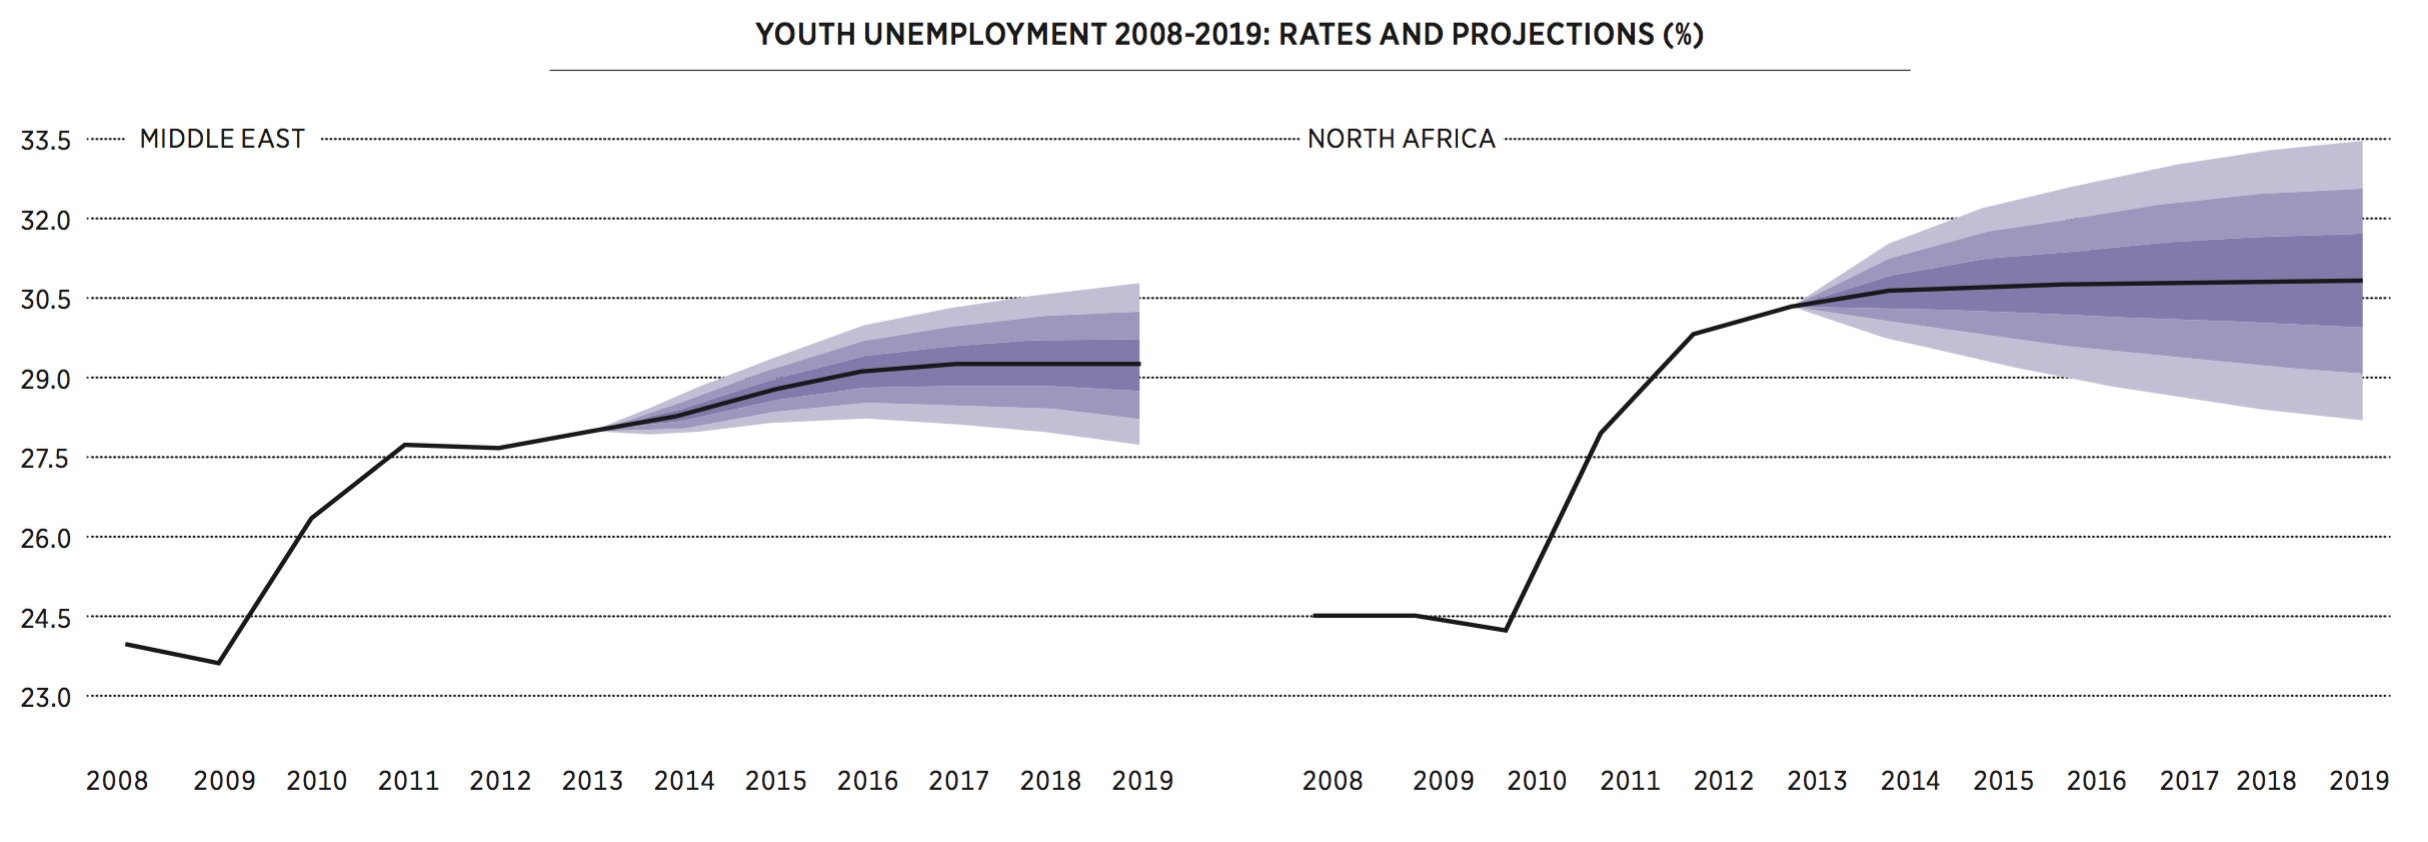 Demographics and sluggish economic growth suggest there will be no quick solutions to youth unemployment. 